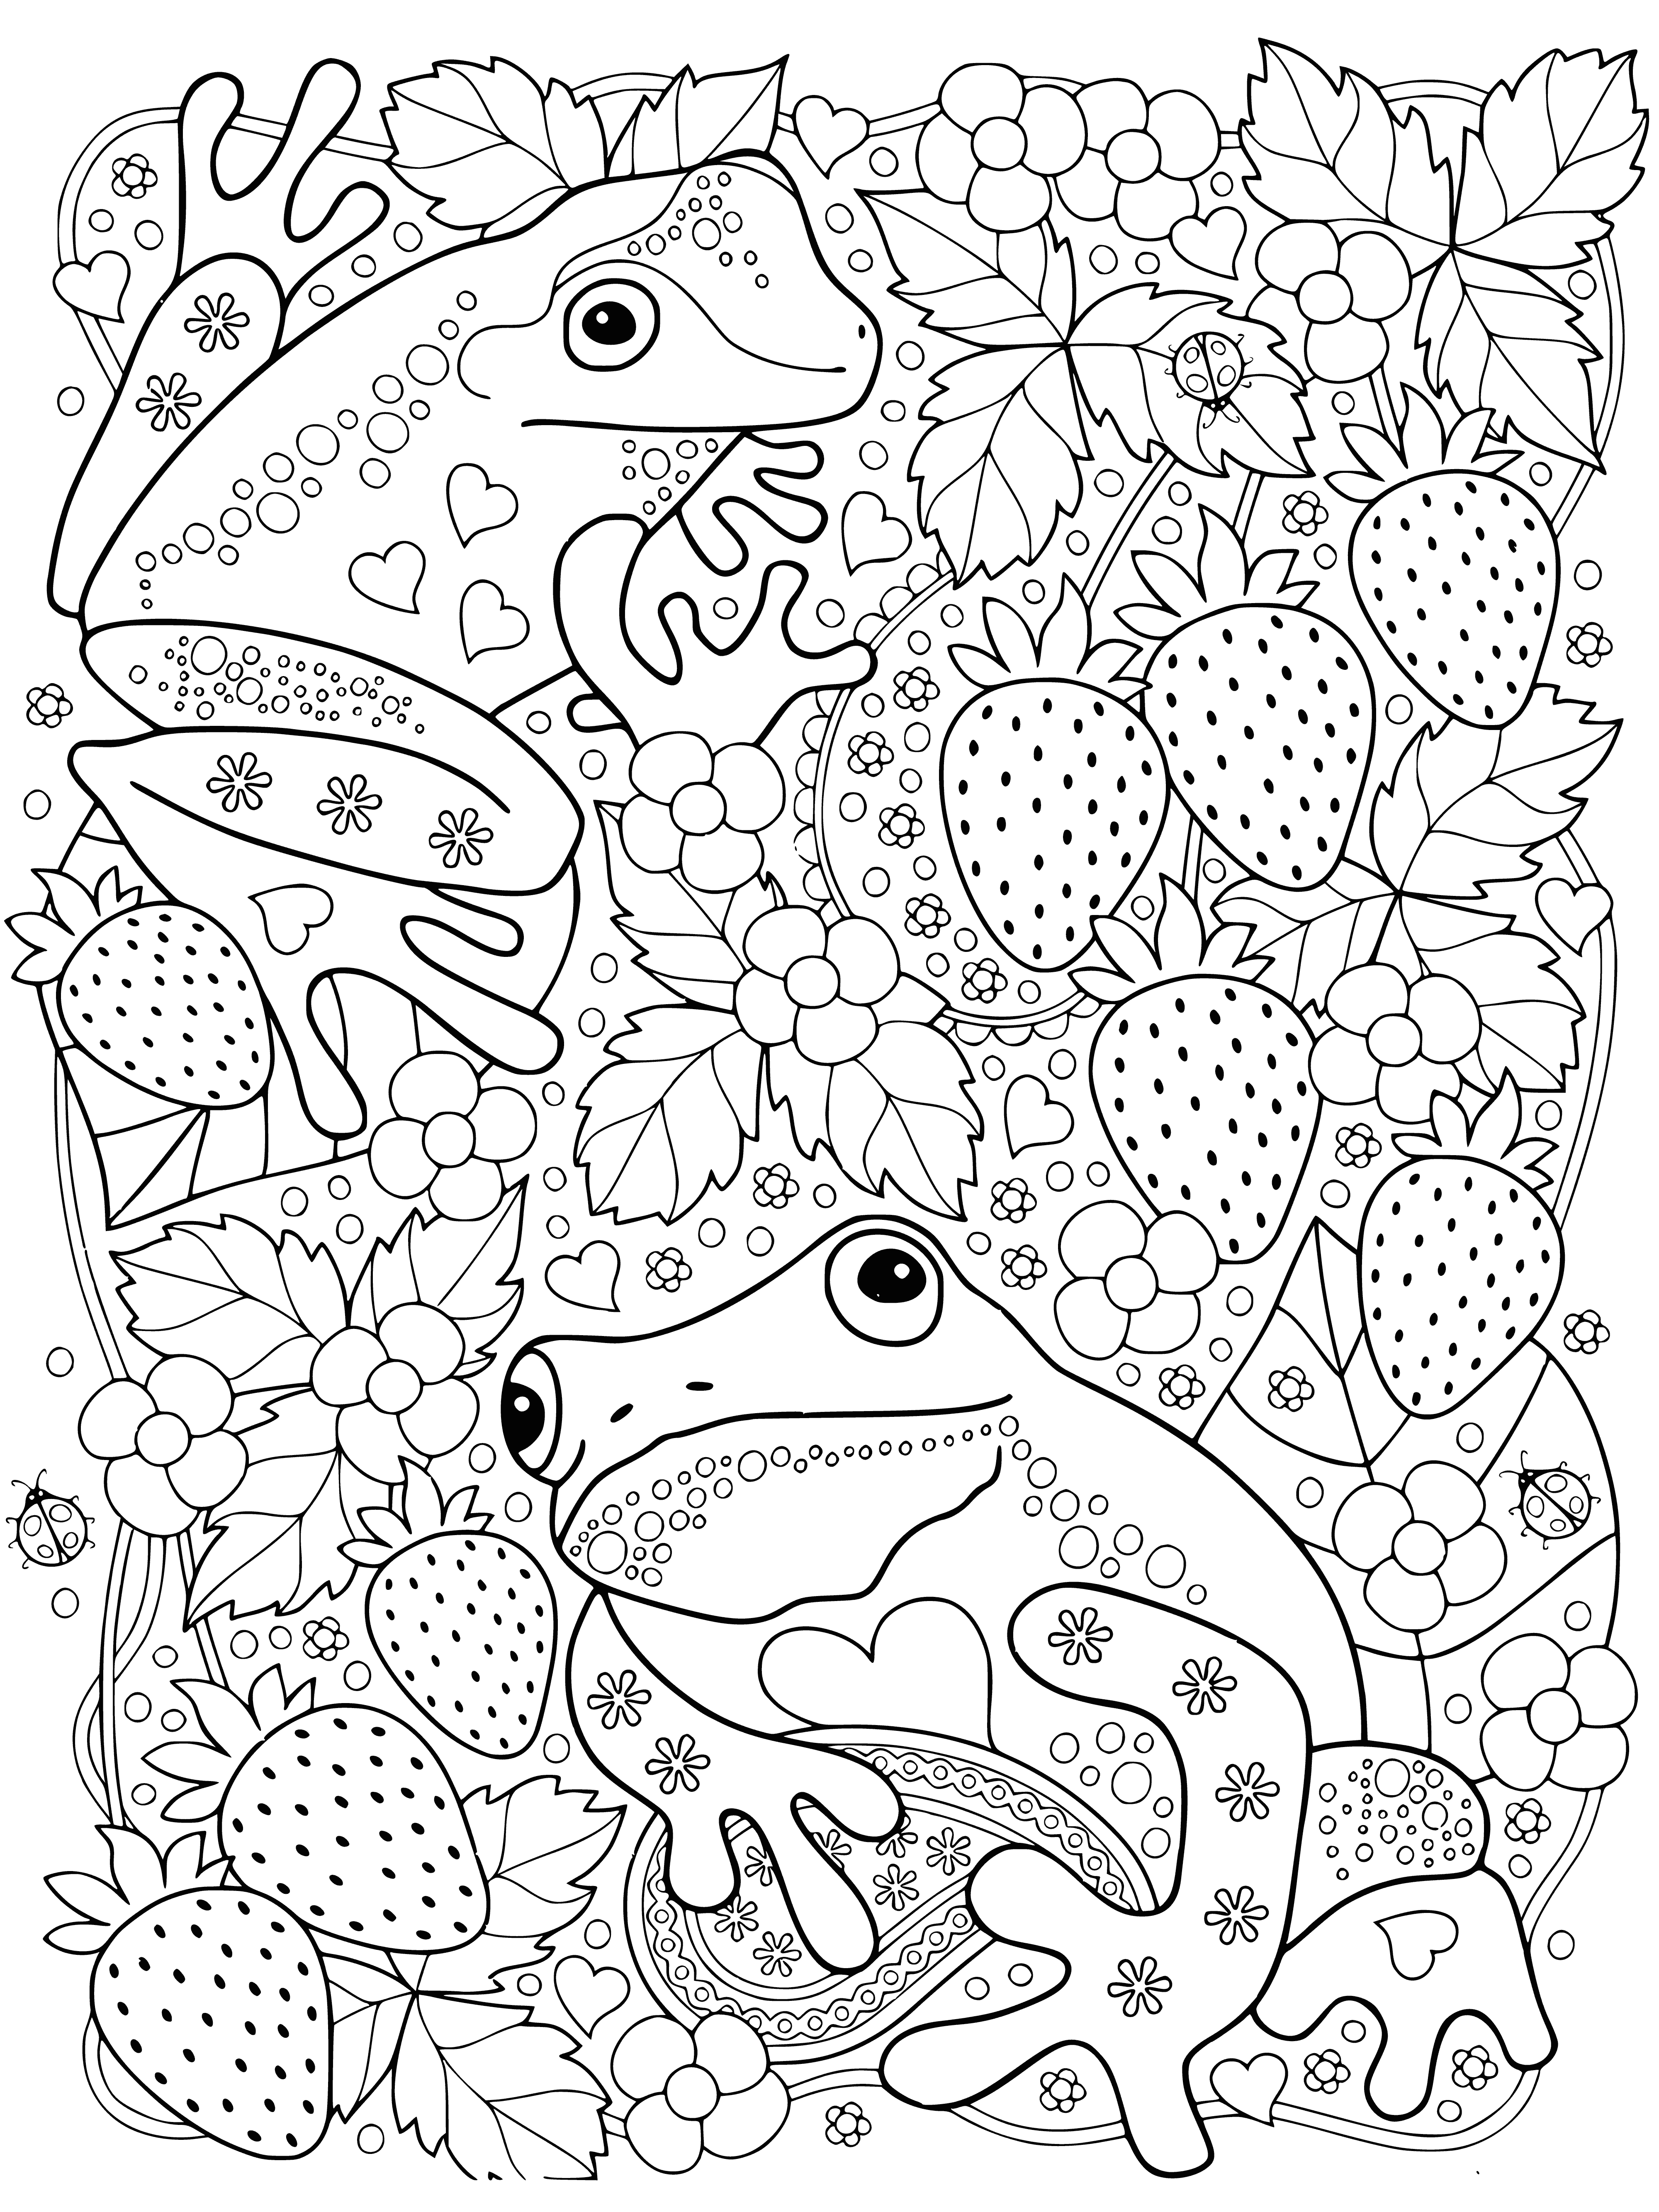 Frogs and strawberries coloring page